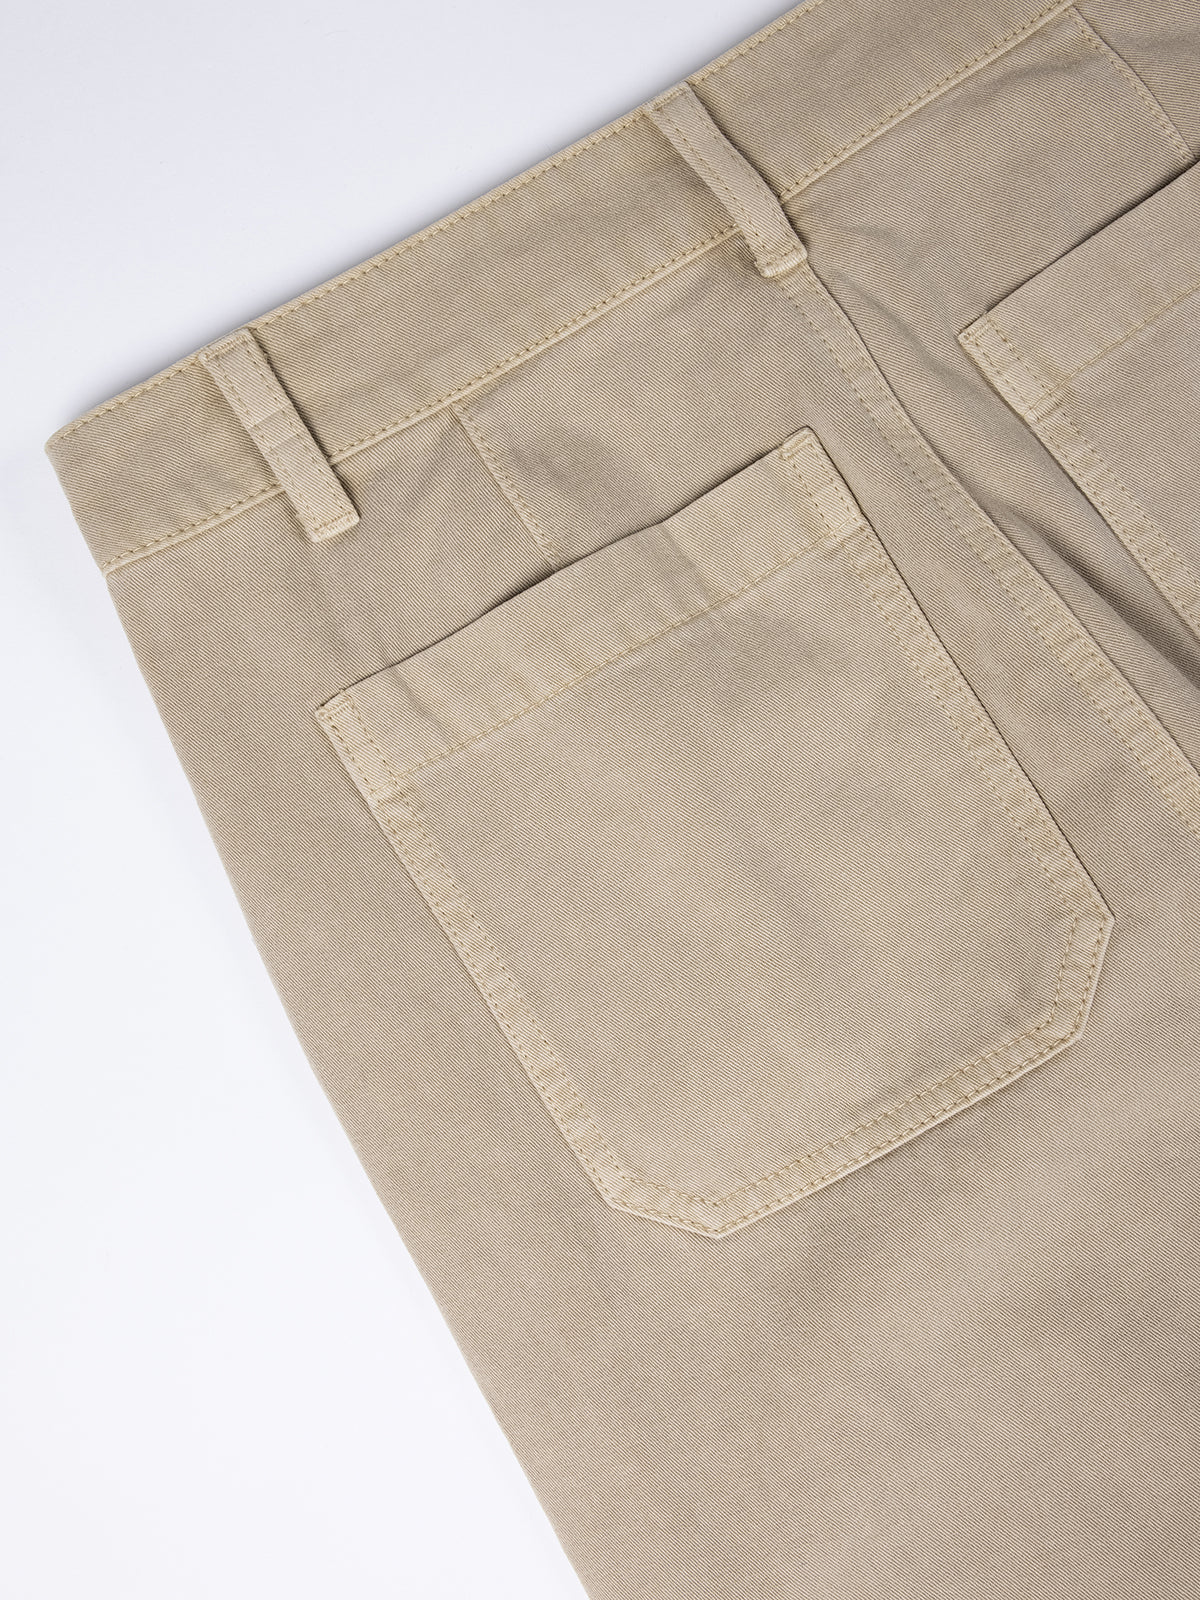 ASOBIO Woven Fabric Tapered Pants